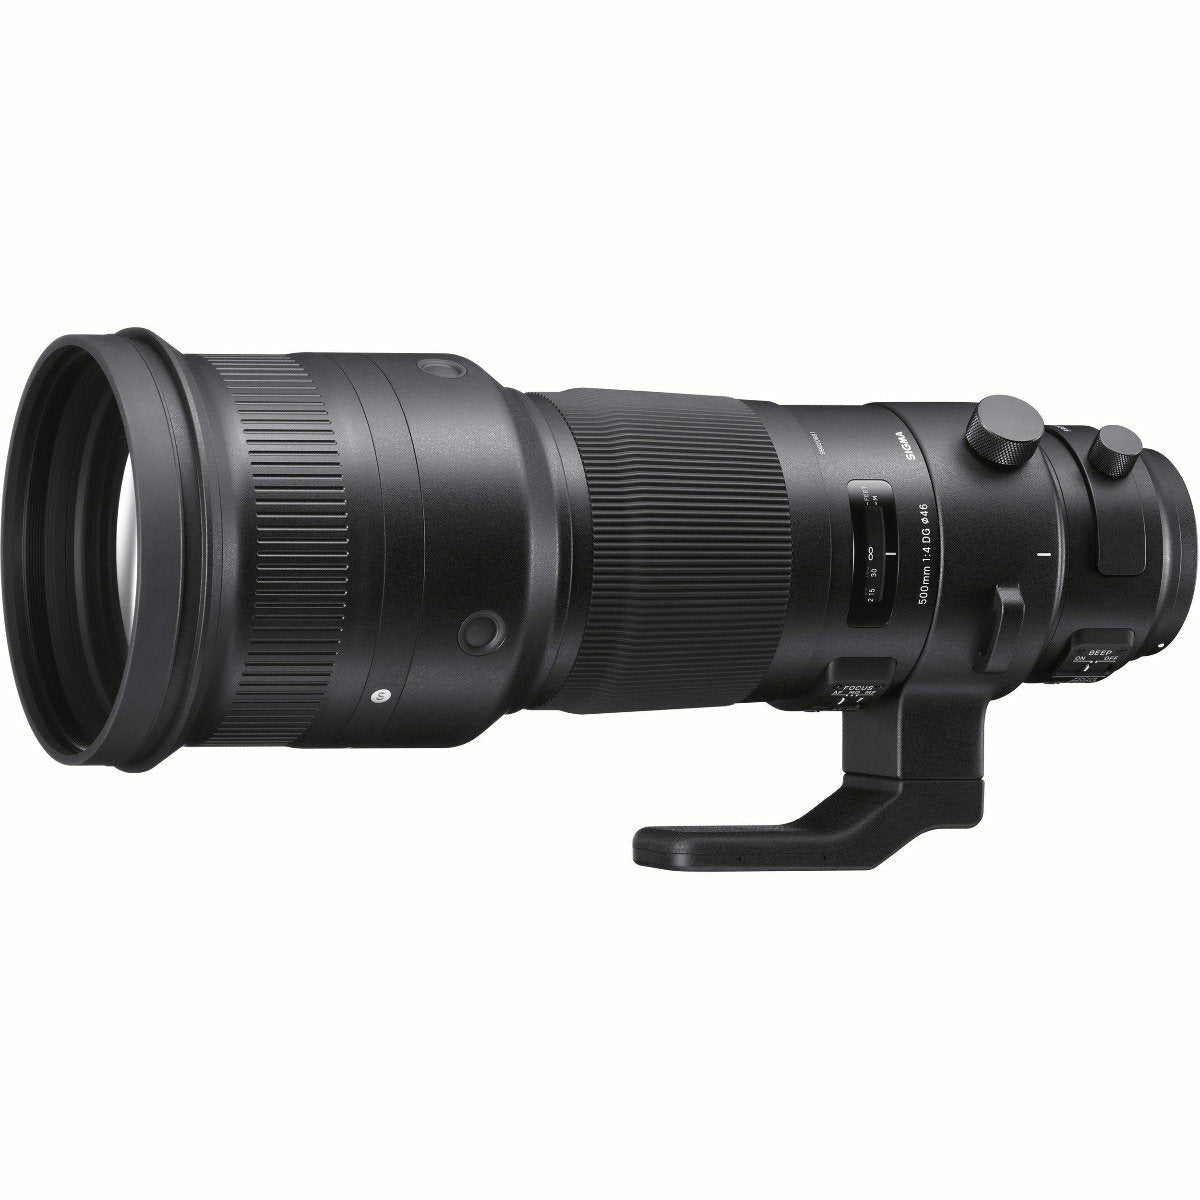 Sigma 500mm f/4 DG OS HSM Sport Lens for Canon - Dragon Image